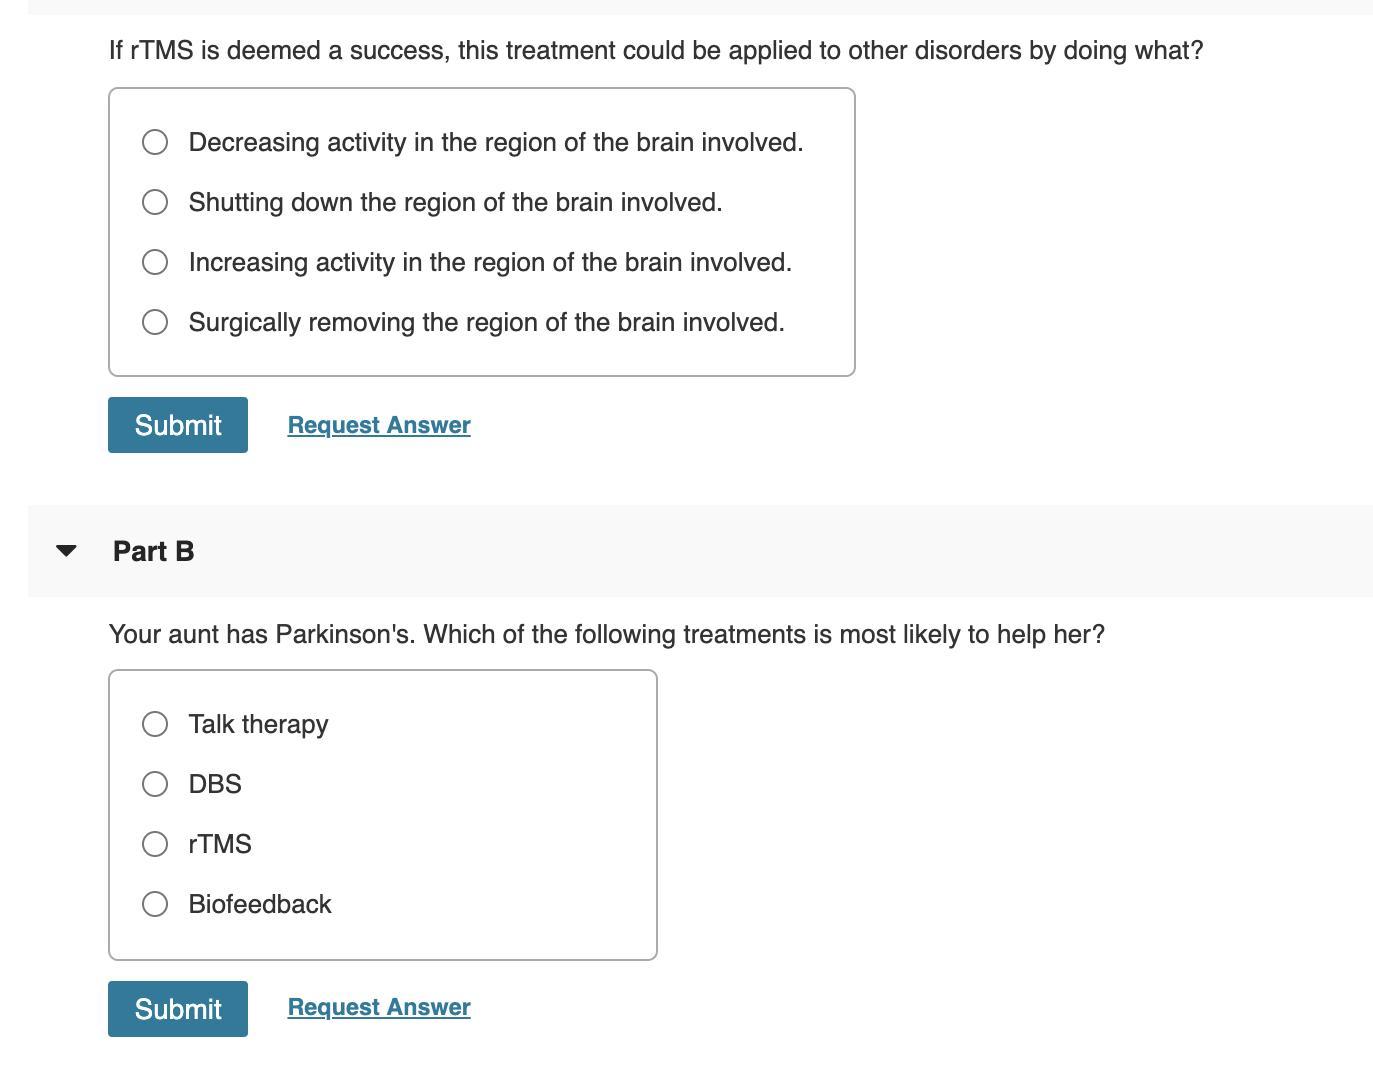 1.If RTMS Is Deemed A Success, This Treatment Could Be Applied To Other Disorders By Doing What?2.Your